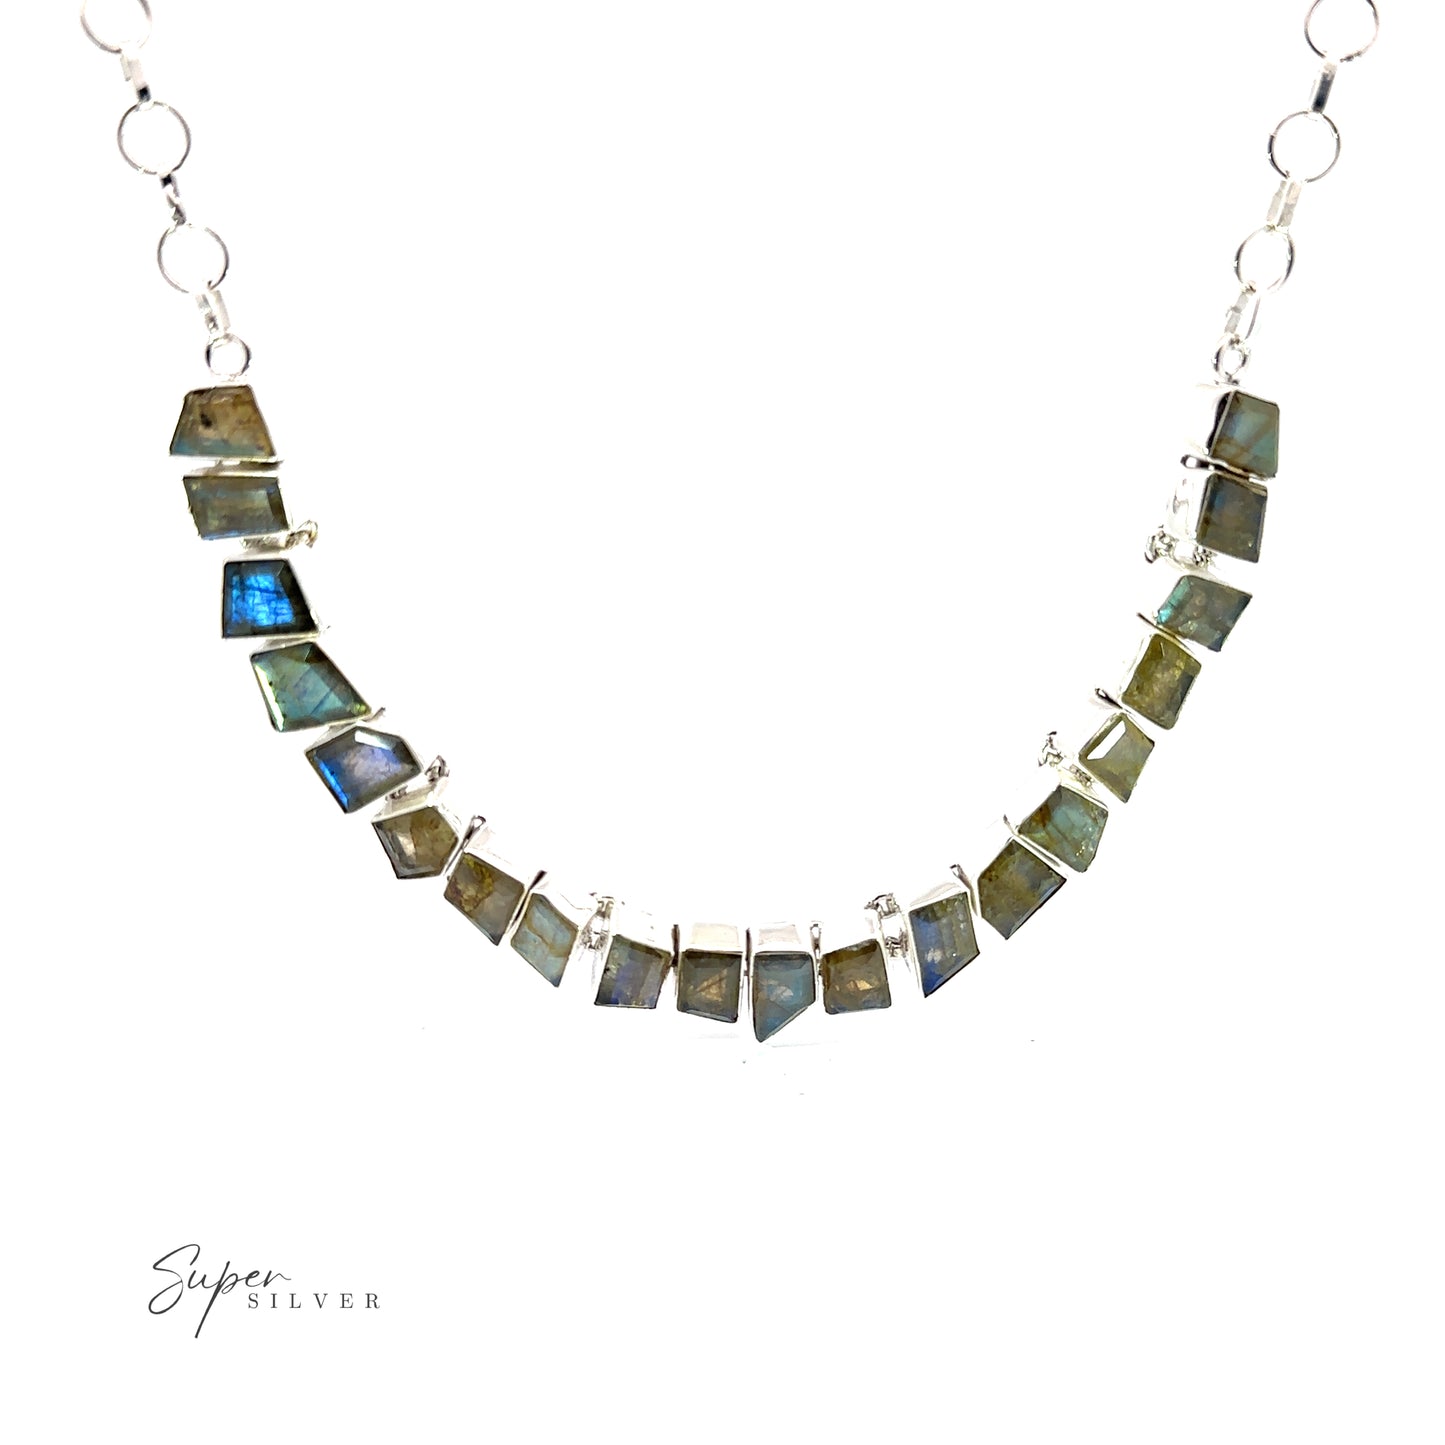 
                  
                    A Statement Gemstone Necklace with alternating rectangular and trapezoidal stone segments, arranged in a symmetrical pattern. The stones vary in shades of blue and green. "Super Silver" logo in the bottom left corner.
                  
                